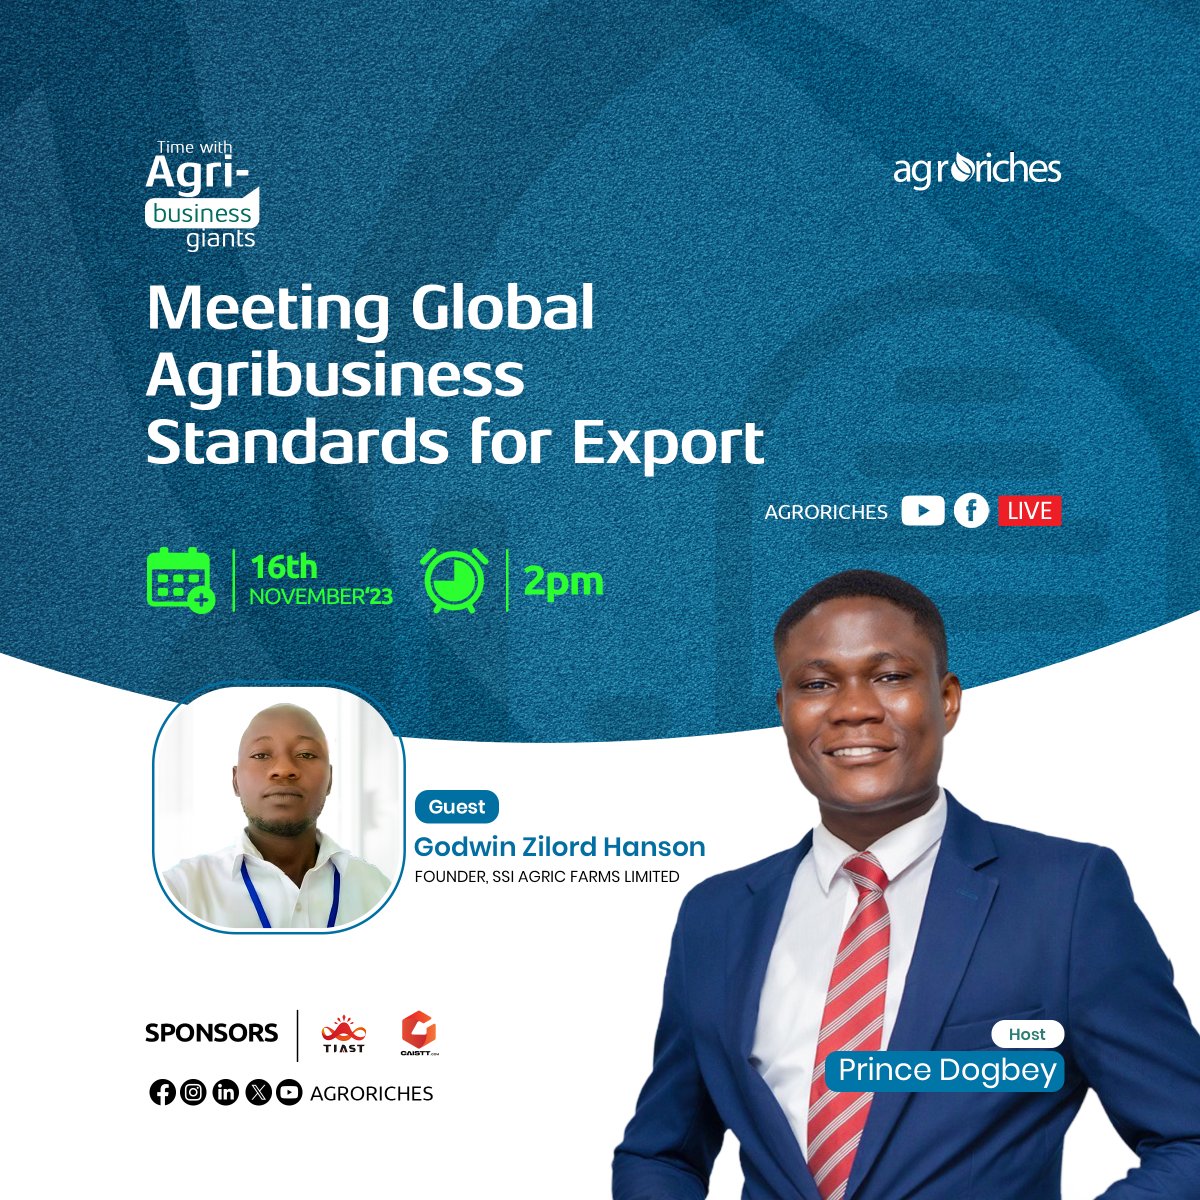 Achieving Global Agribusiness standards for export is our focus! Join us live today at 2 pm on Facebook and YouTube as we explore the requirements necessary to meet the standards for exporting your products. Don't miss out!

#export #Standardization #tiastgroup #youthdevelopment